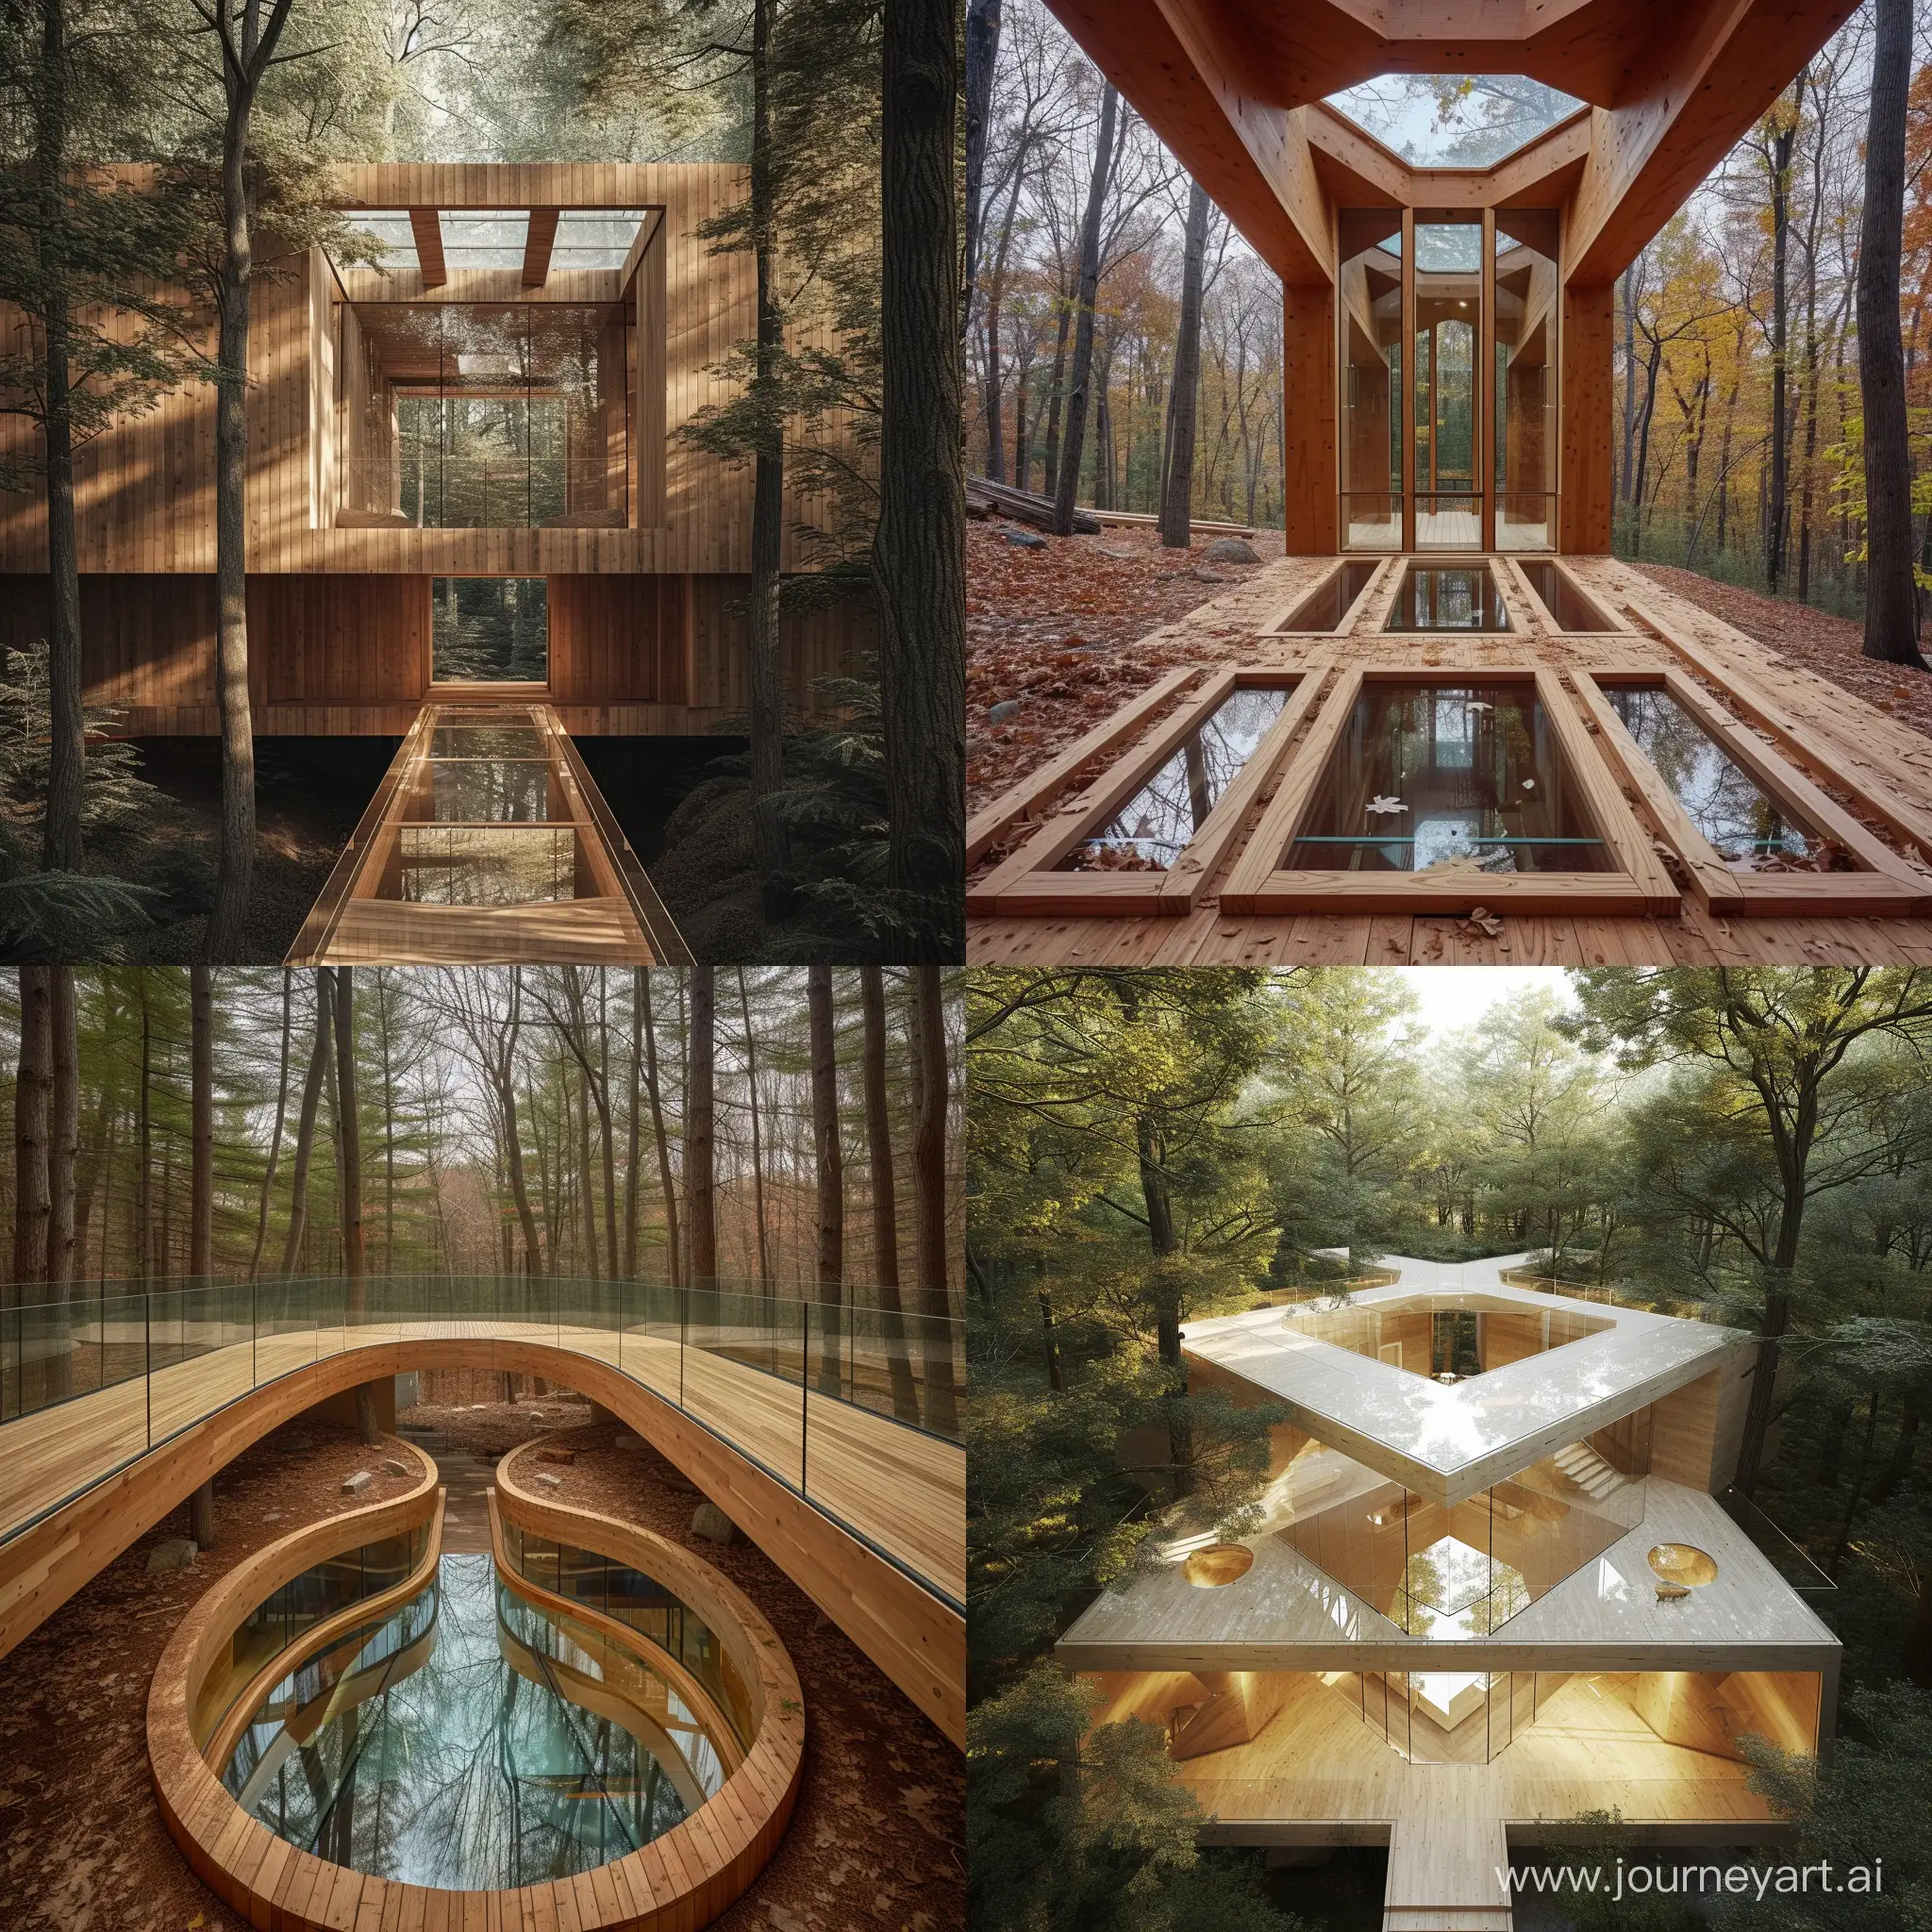 mass timber architecture design with a glass atrium in the center nestled in the wood